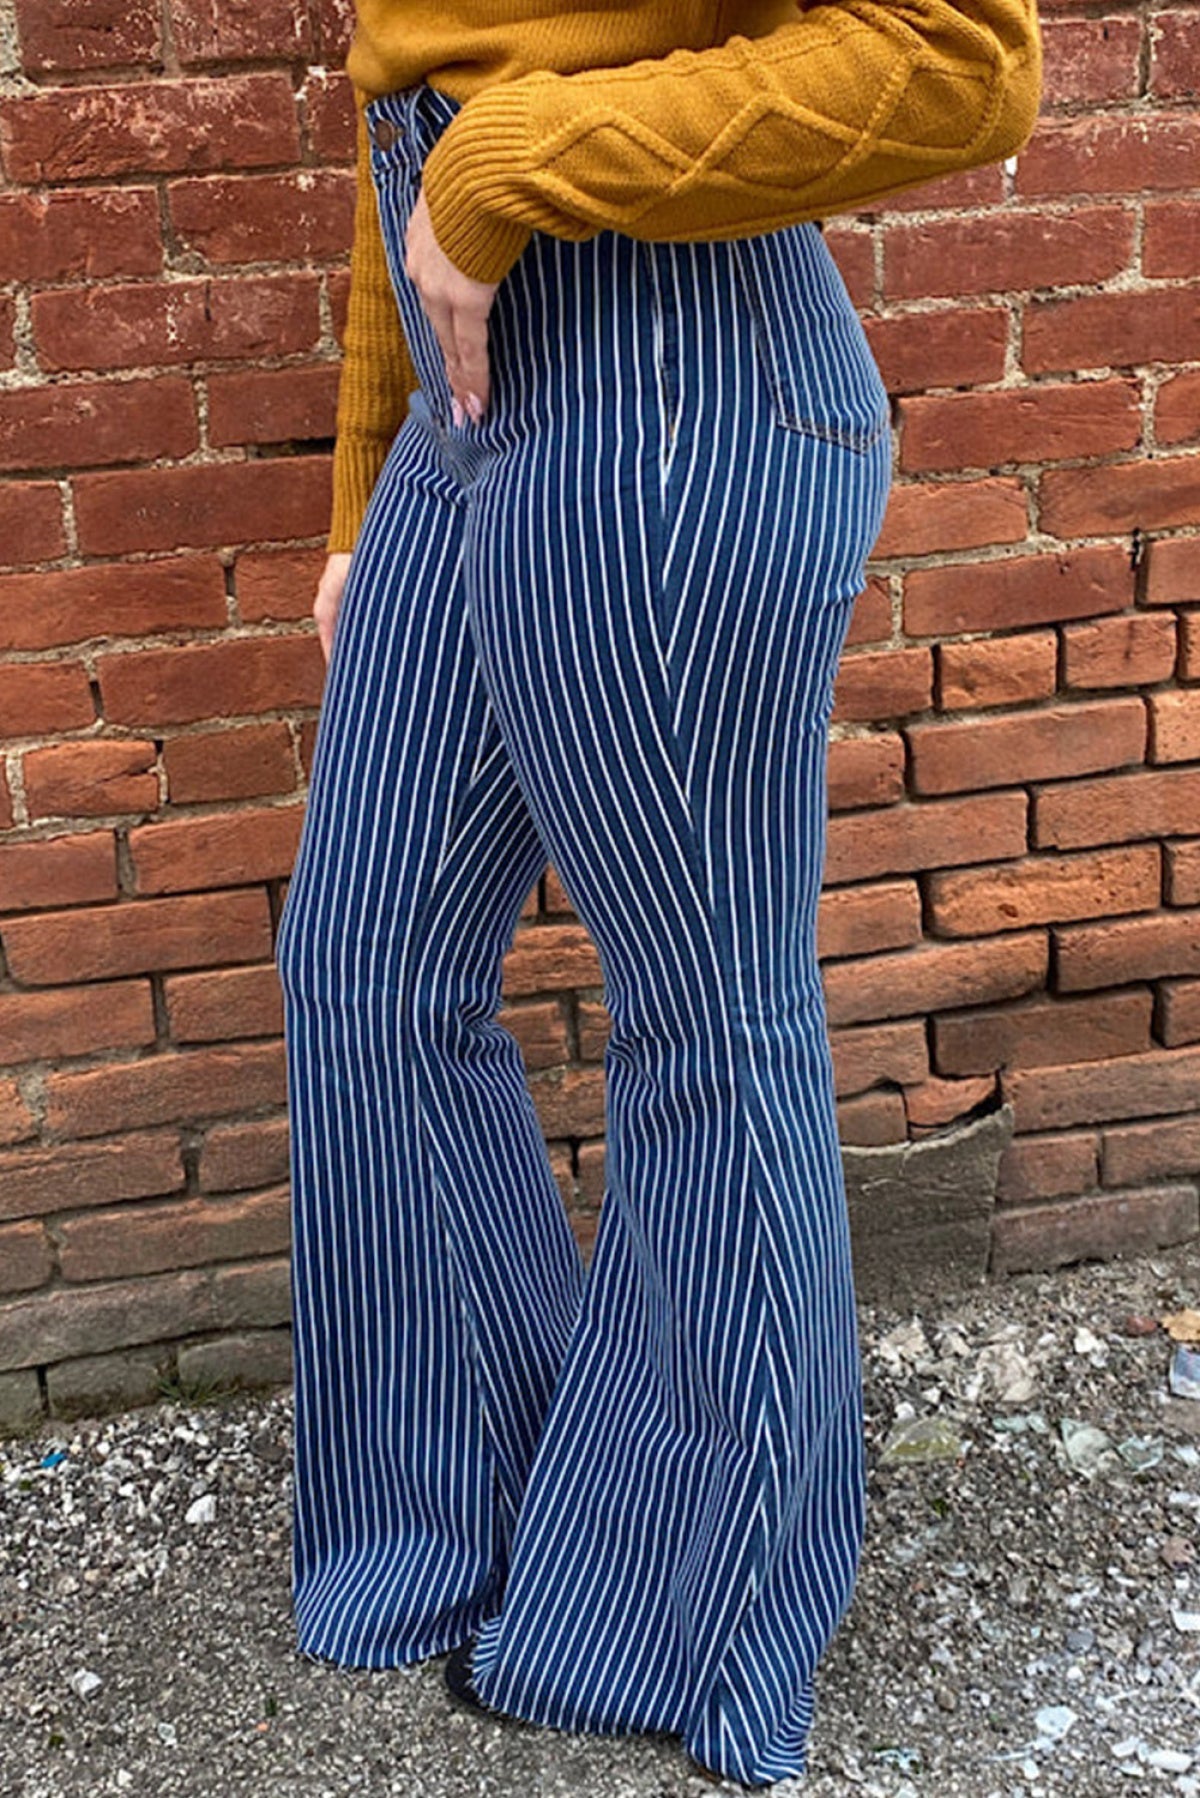 Plus Size High Waist Pin Stripe Flared Jeans